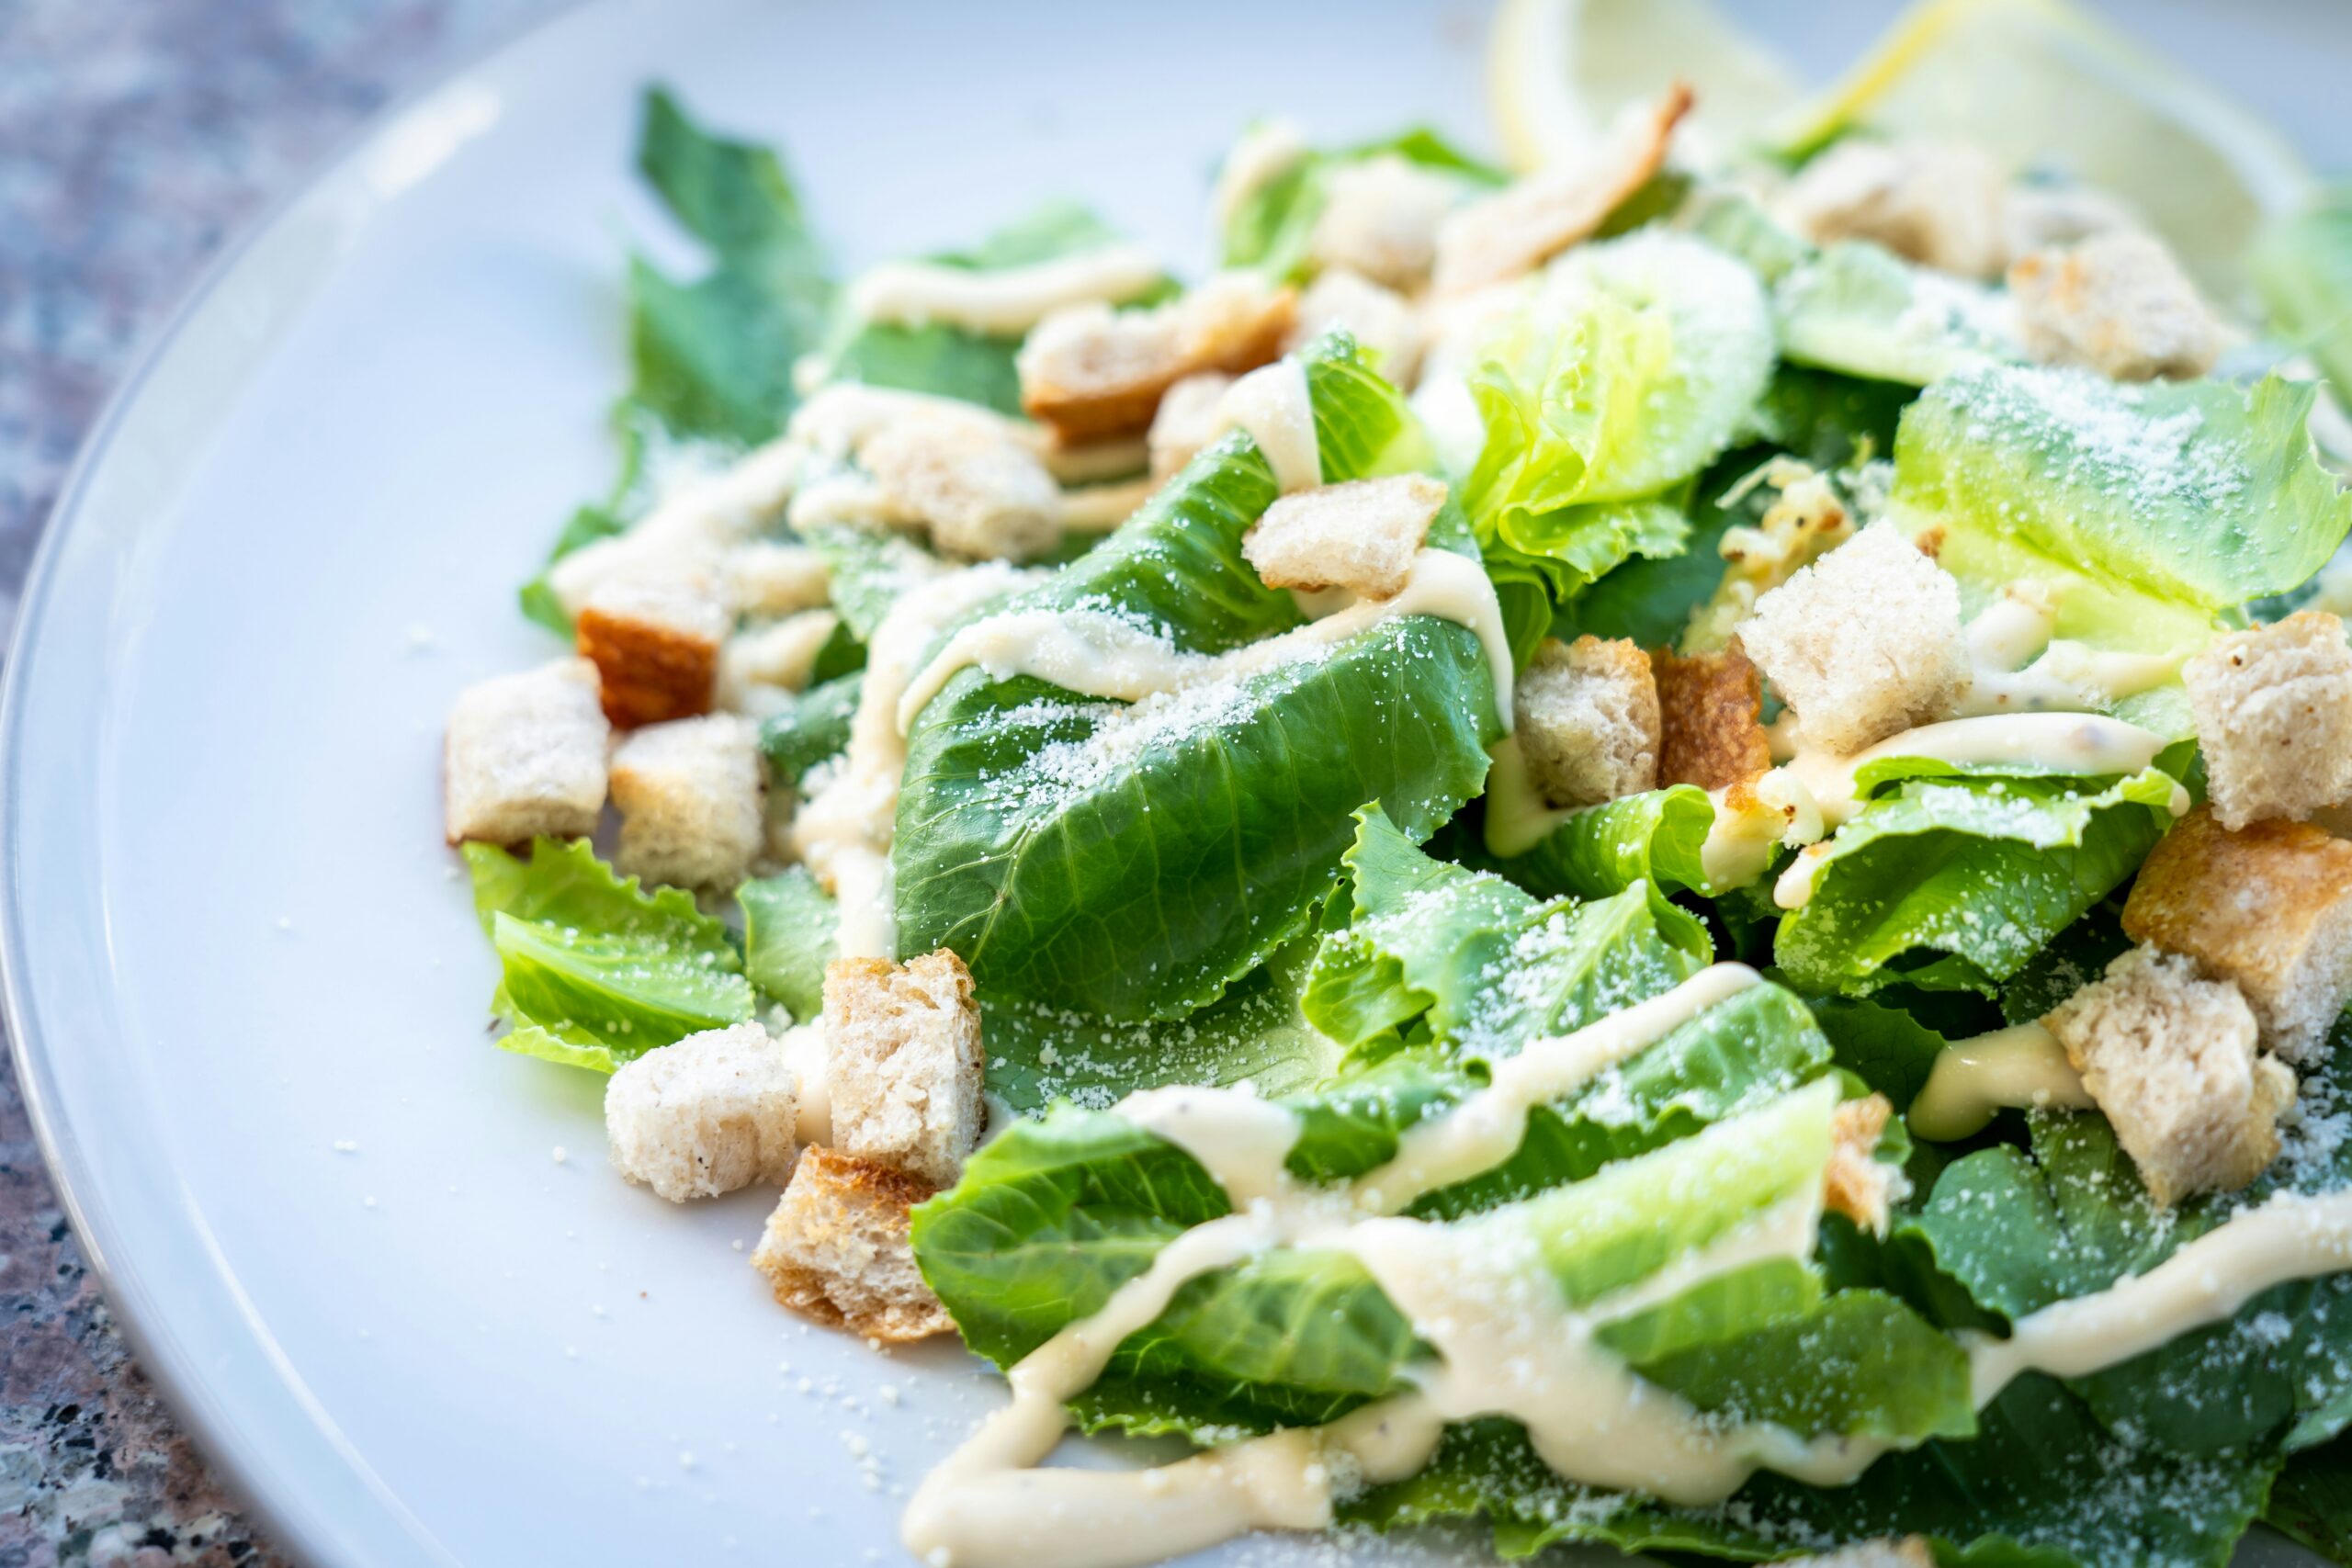 A caesar salad is the perfect starter course in your Valentine's Day dinner idea. Pictured: A caesar salad.